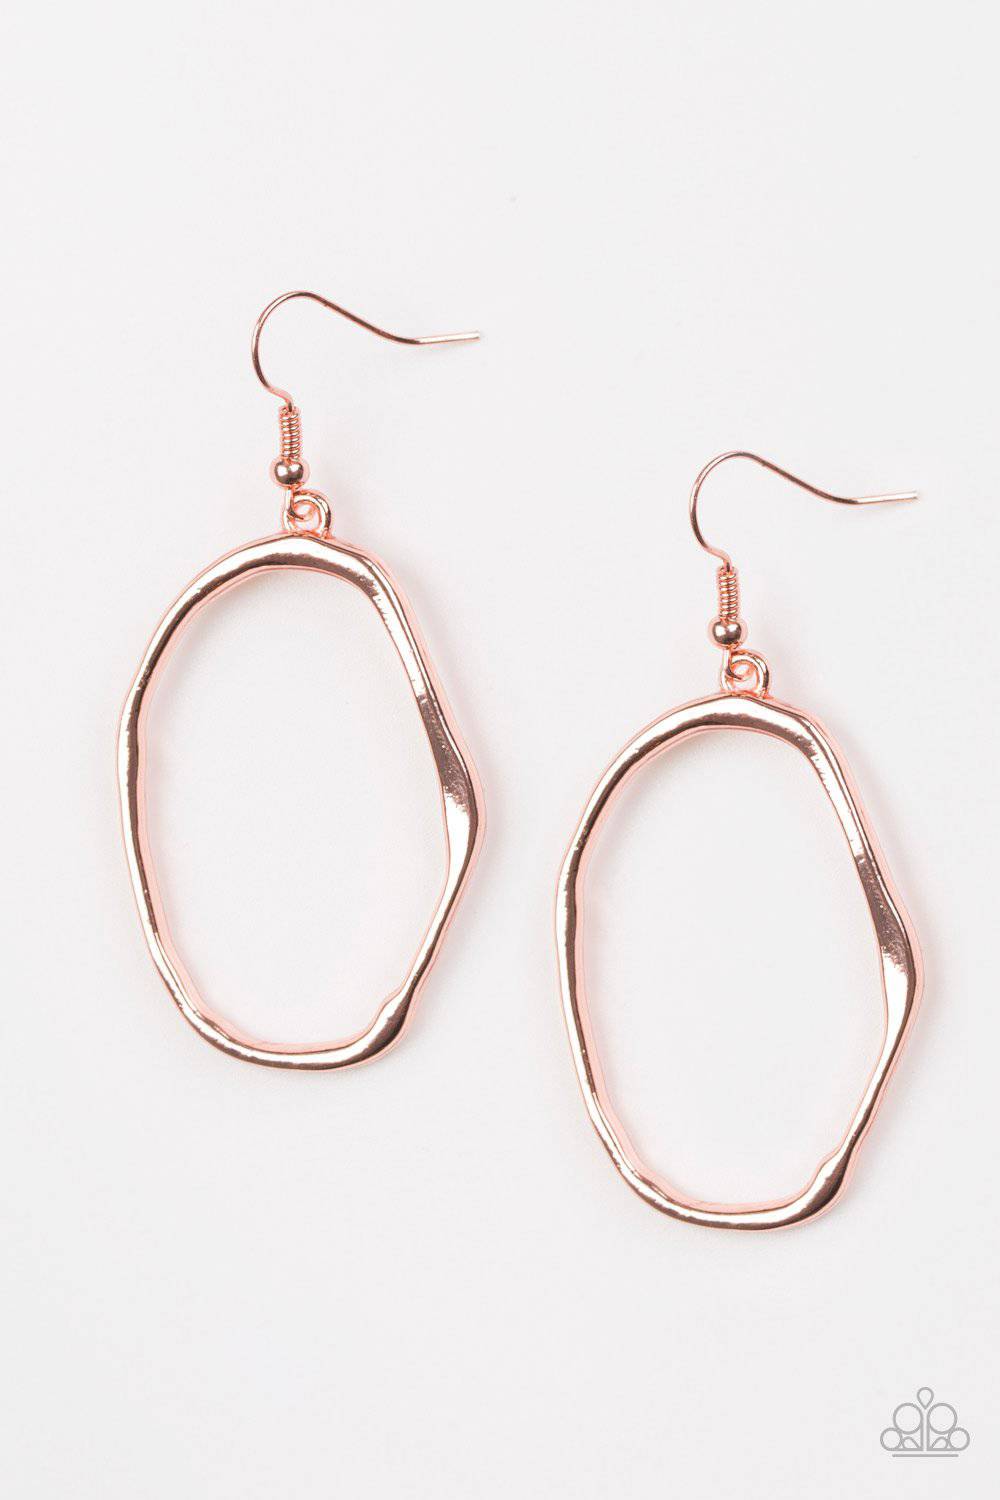 D64 - Eco Chic Copper Earrings by Paparazzi Accessories on Fancy5Fashion.com